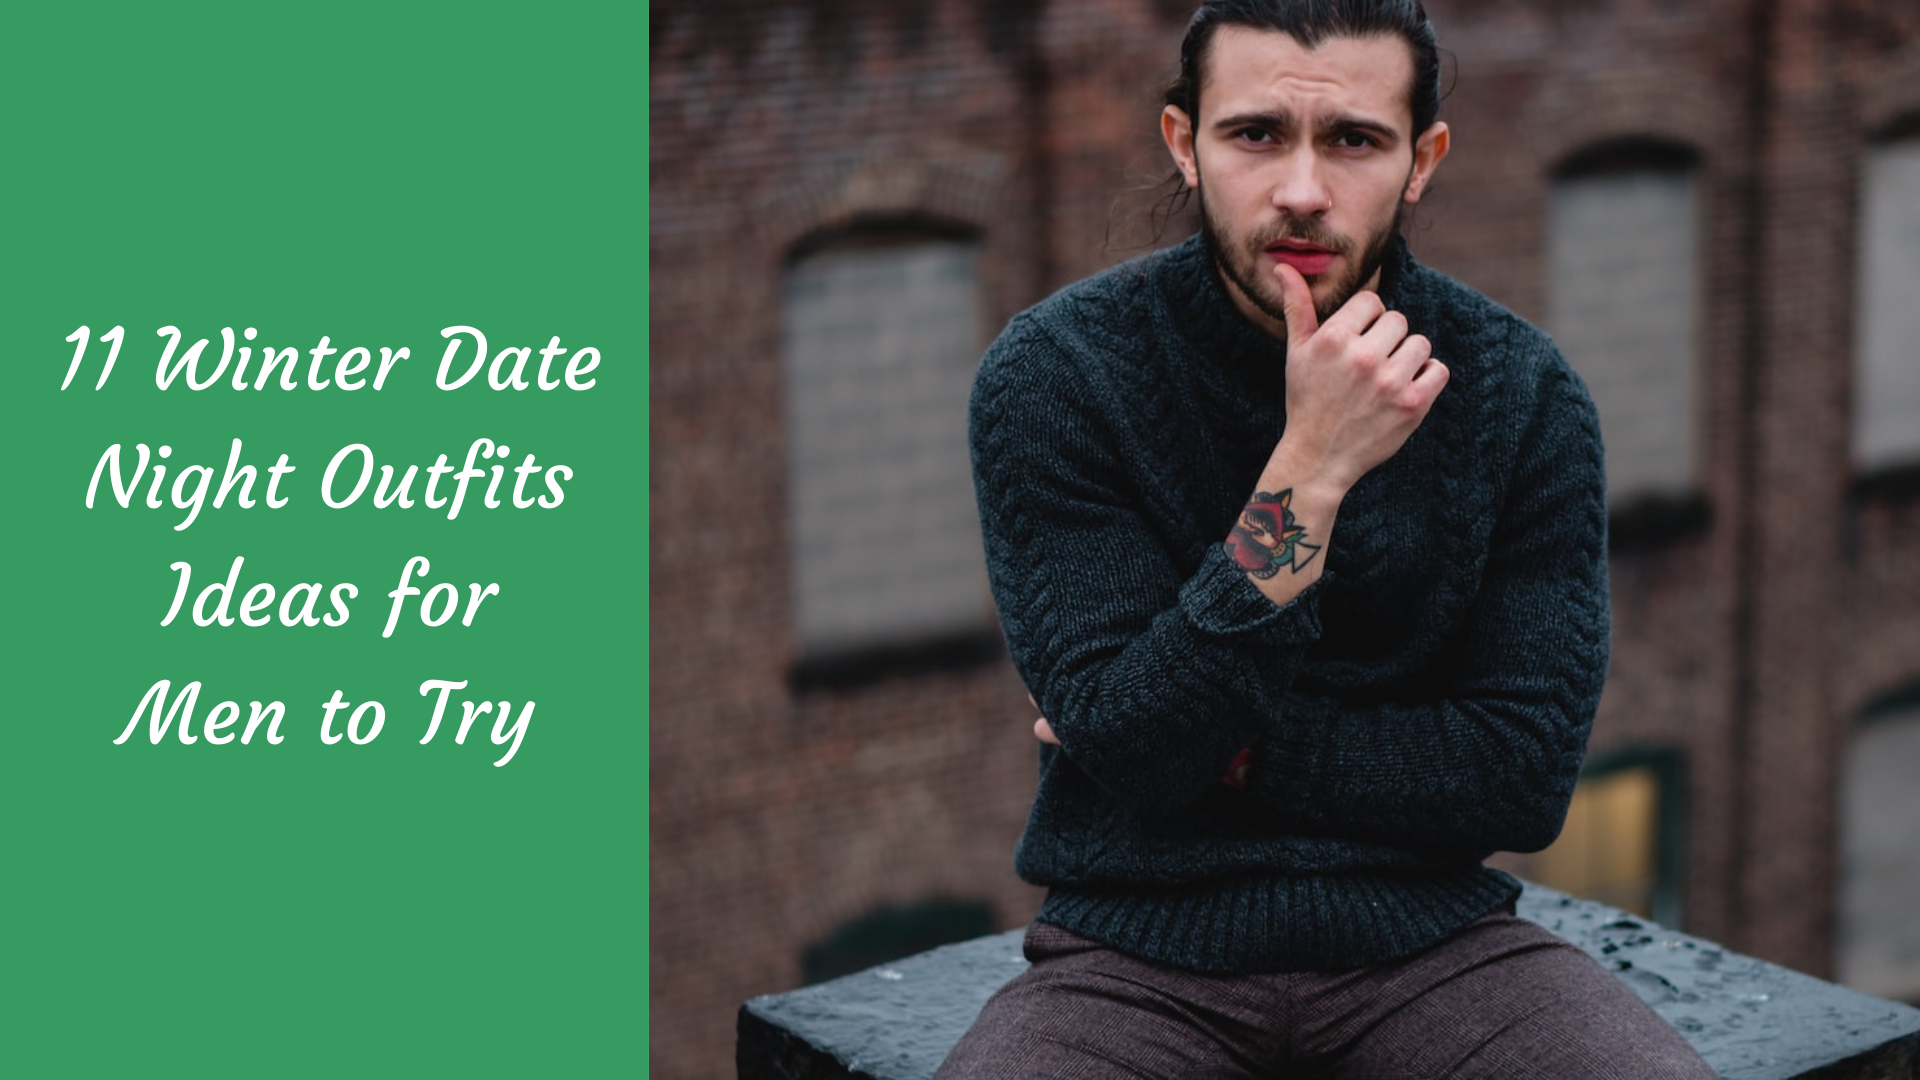 11 Winter Date Night Outfits Ideas for Men to Try - The Kosha Journal